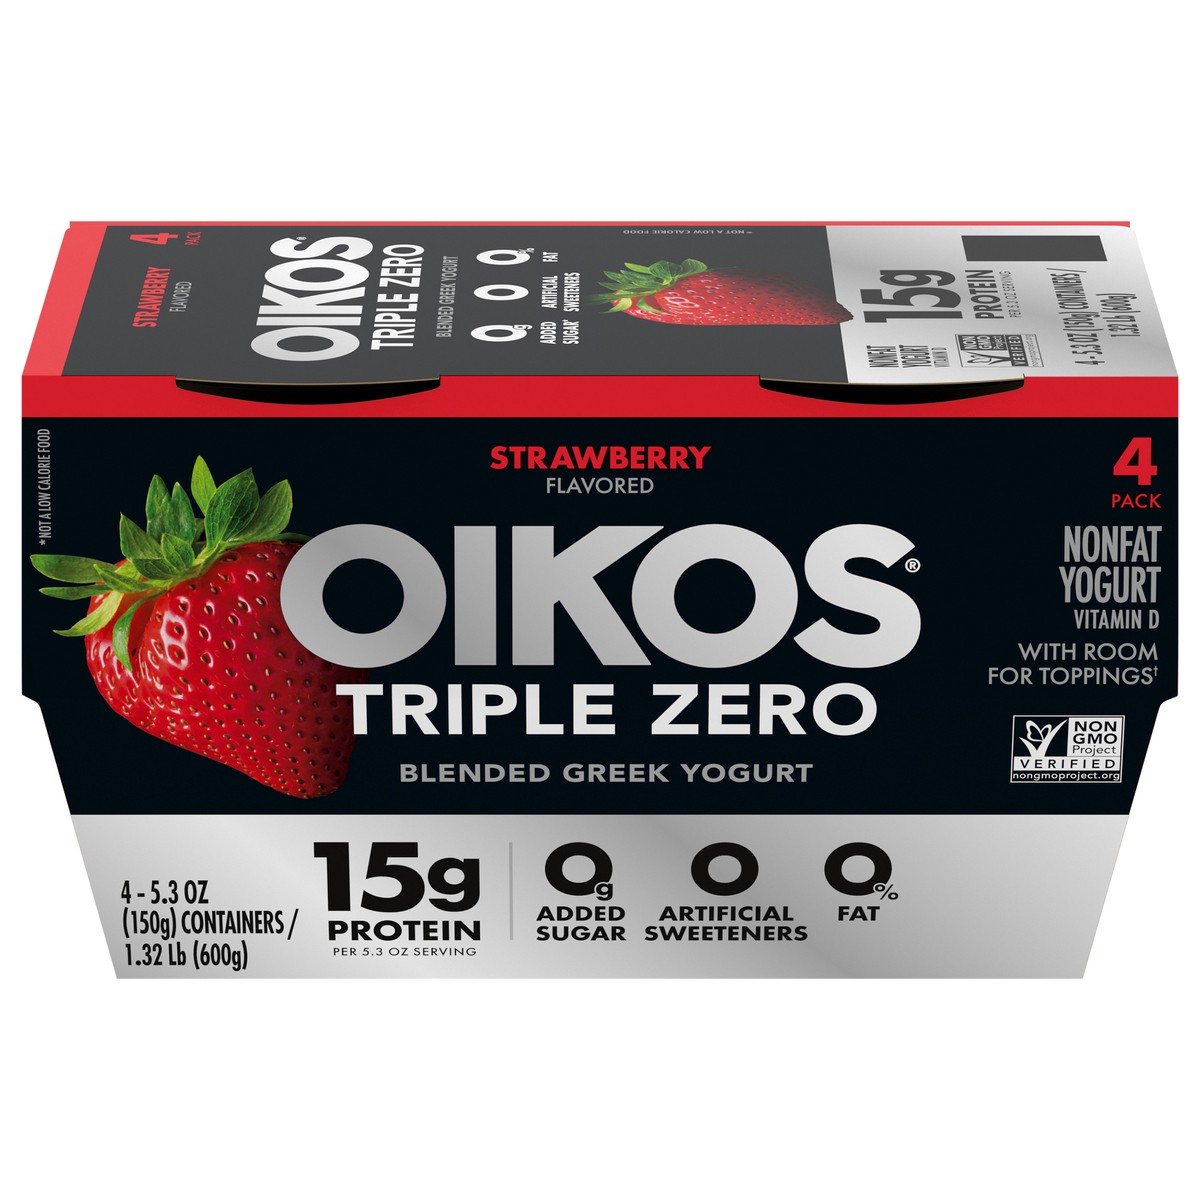 slide 1 of 5, Oikos Triple Zero Strawberry Nonfat Greek Yogurt Pack, 0% Fat, 0g Added Sugar and 0 Artificial Sweeteners, Just Delicious High Protein Yogurt, 4 Ct, 5.3 OZ Cups, 5.3 oz